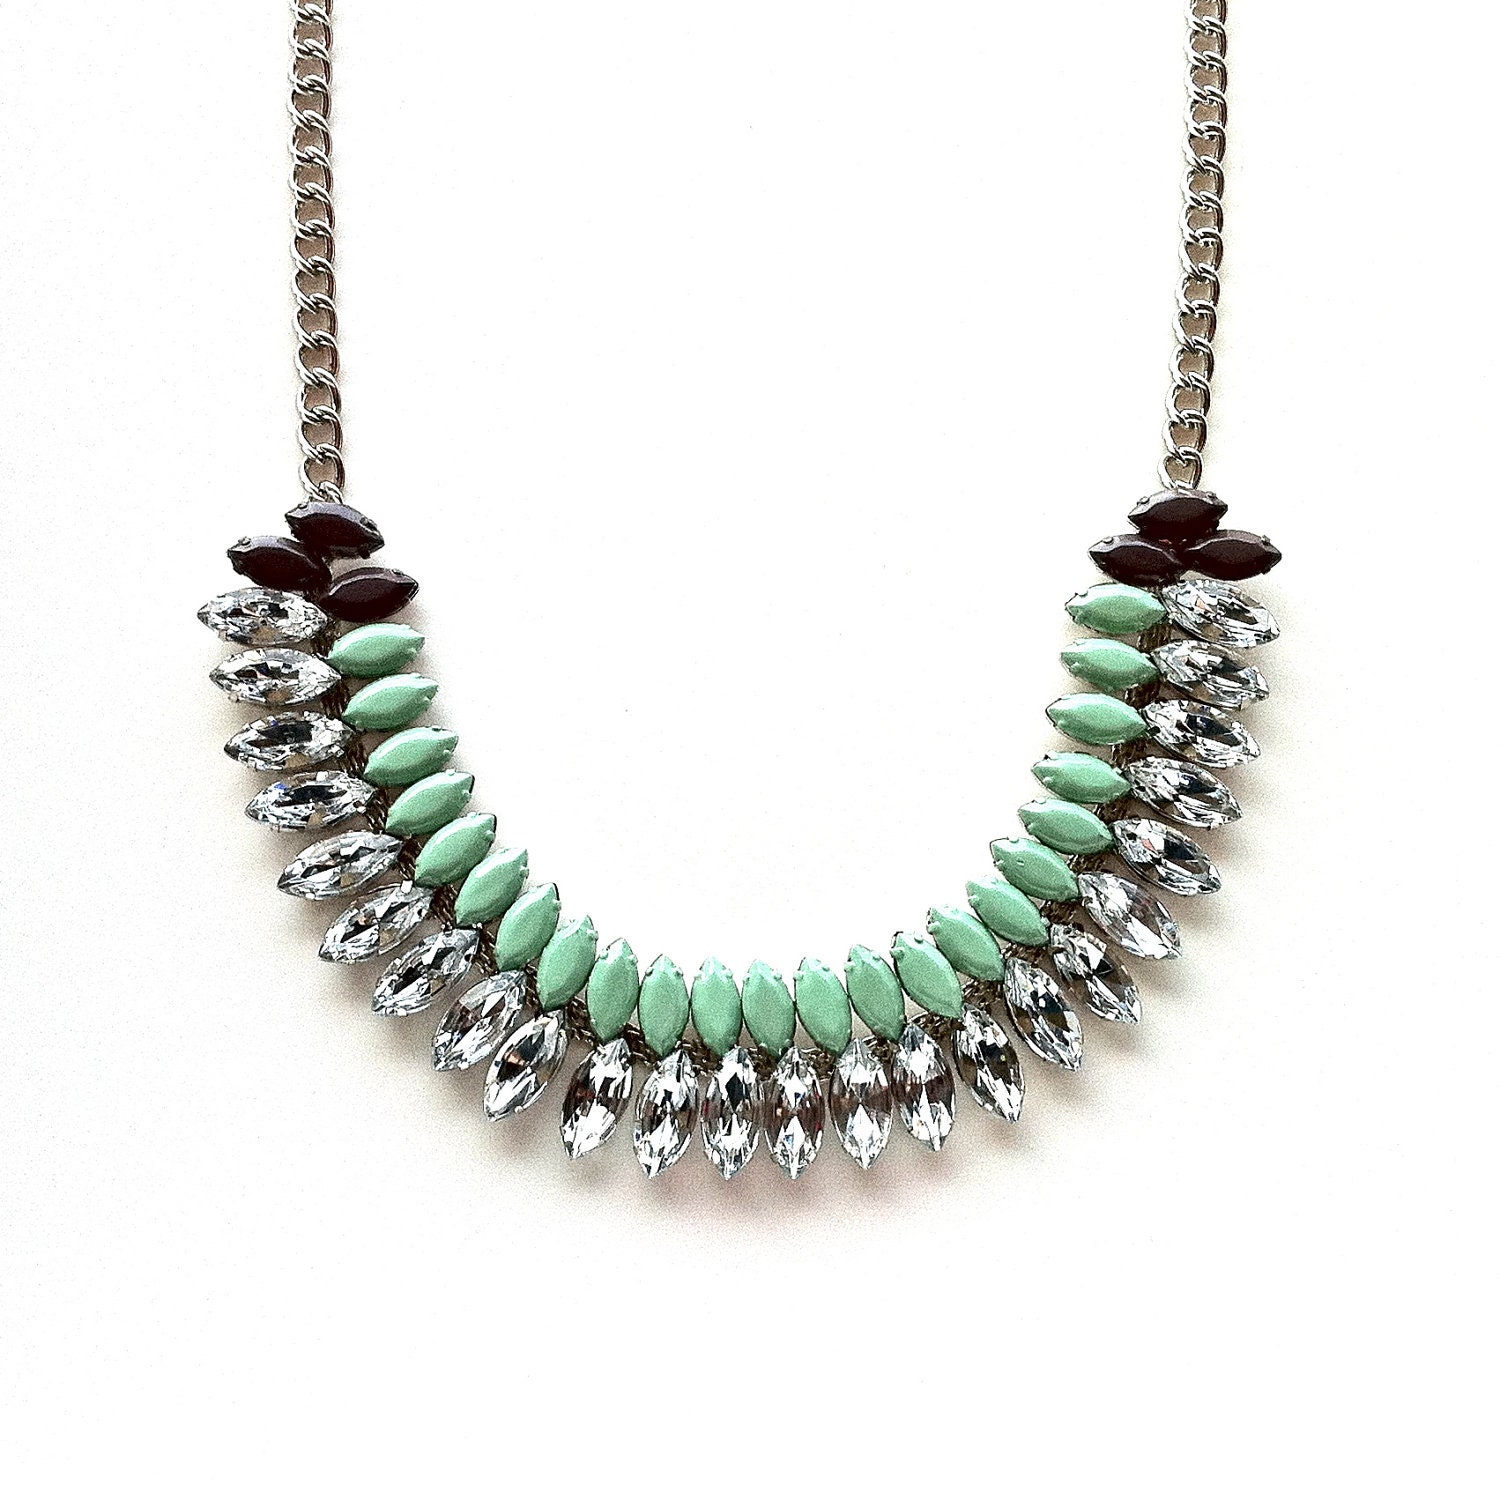 Mint Green and Mushroom Hand-painted Crystal Necklace